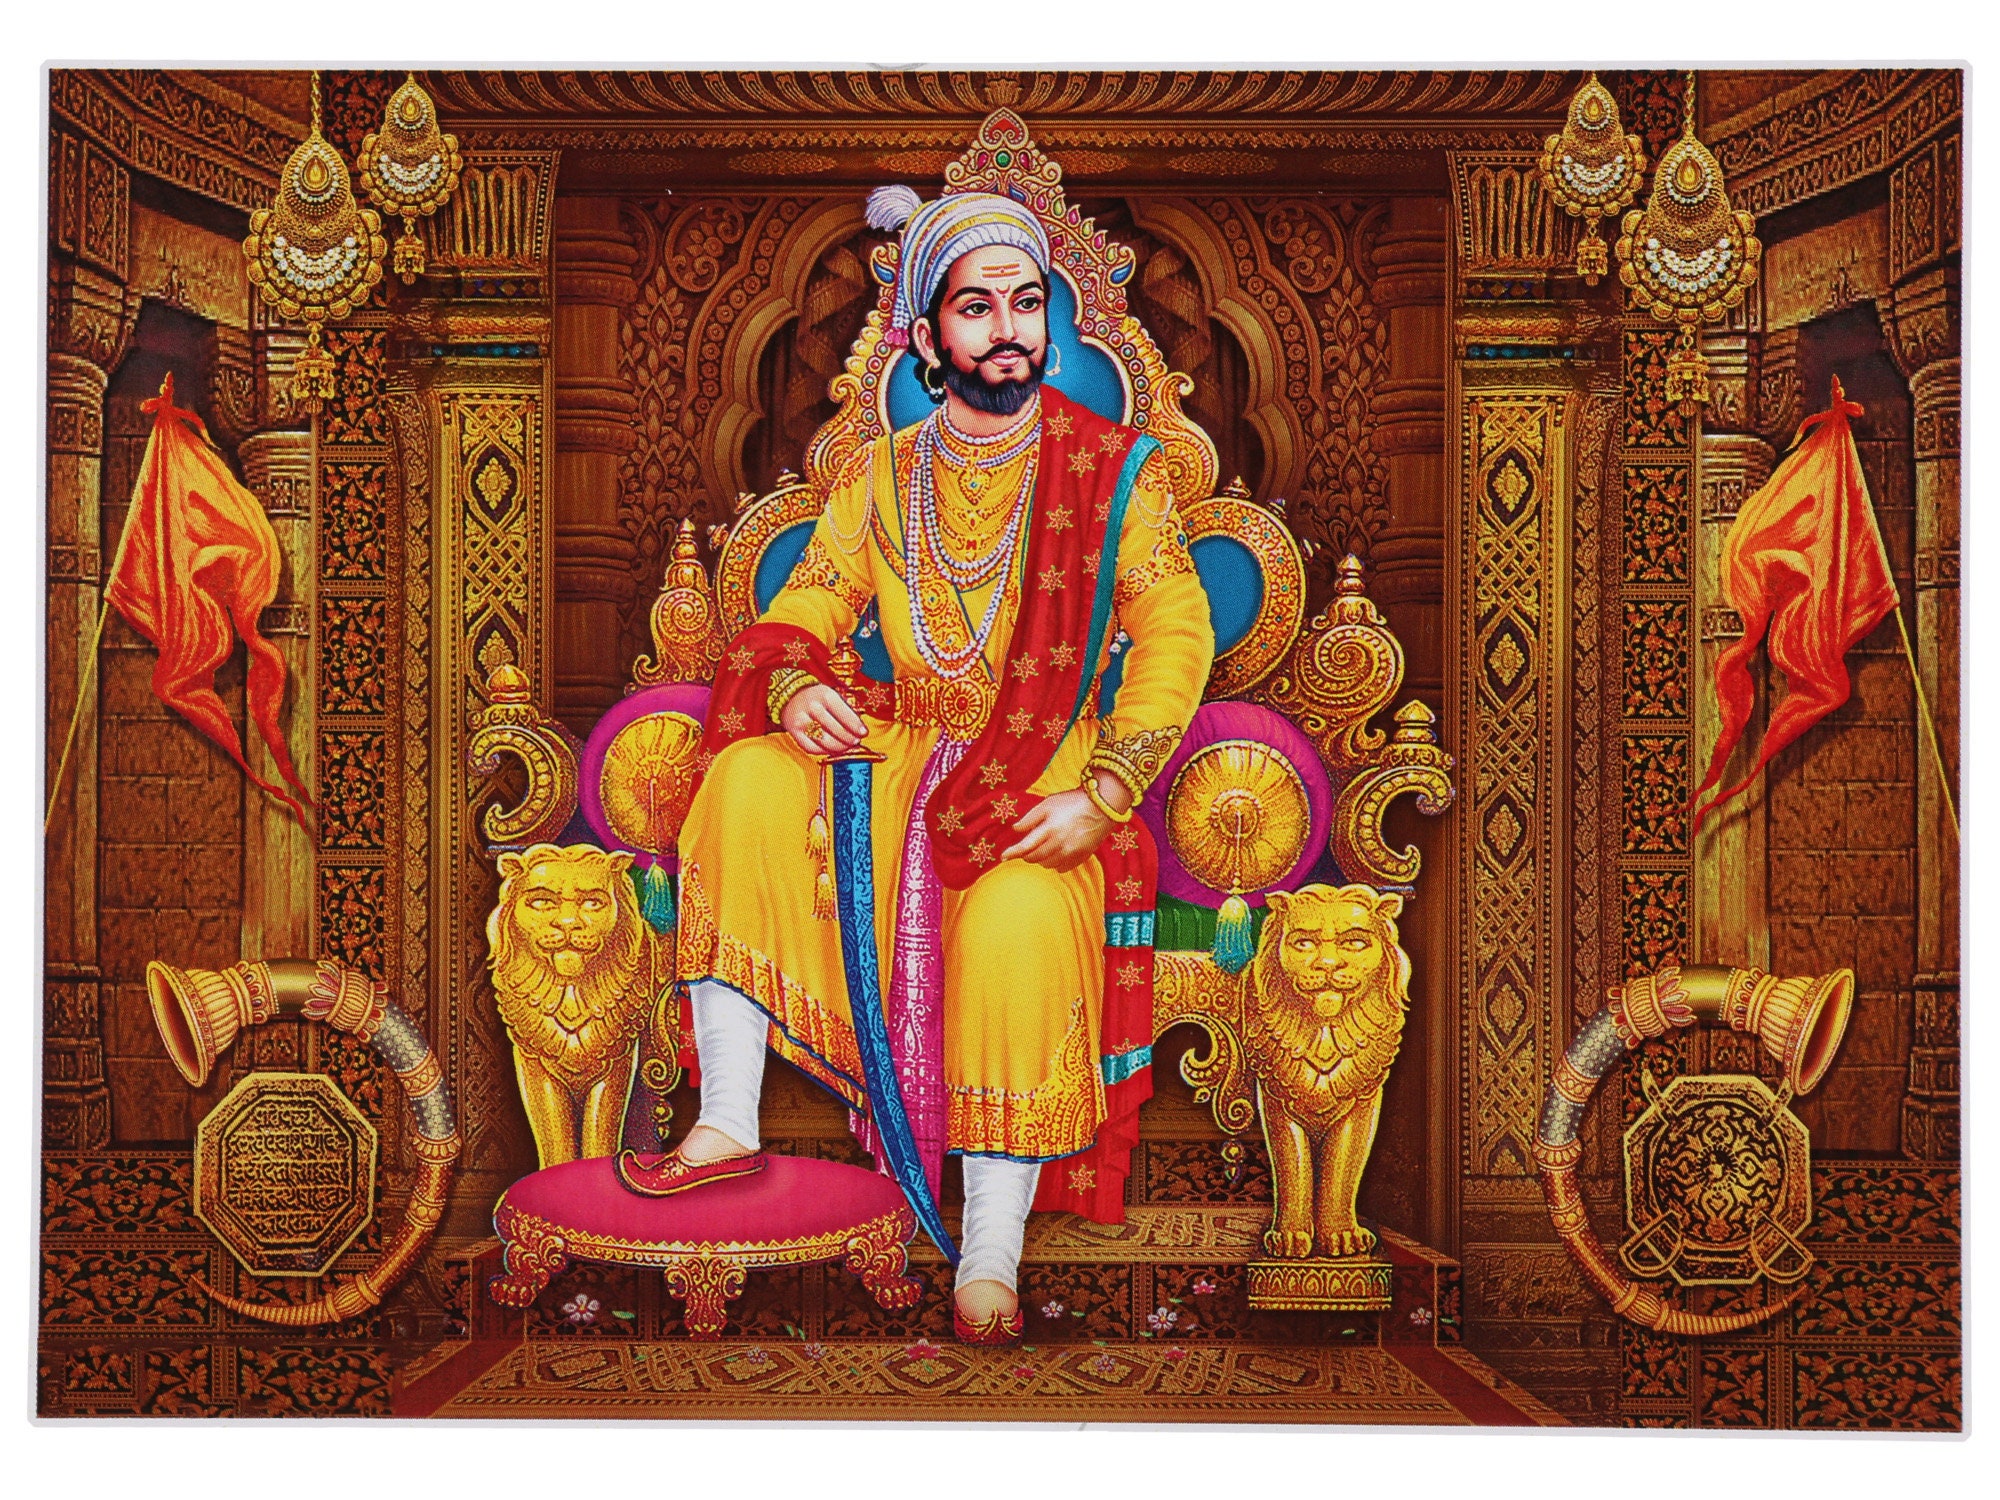 AI-generated images imagine what Indian rulers looked like | Times Now